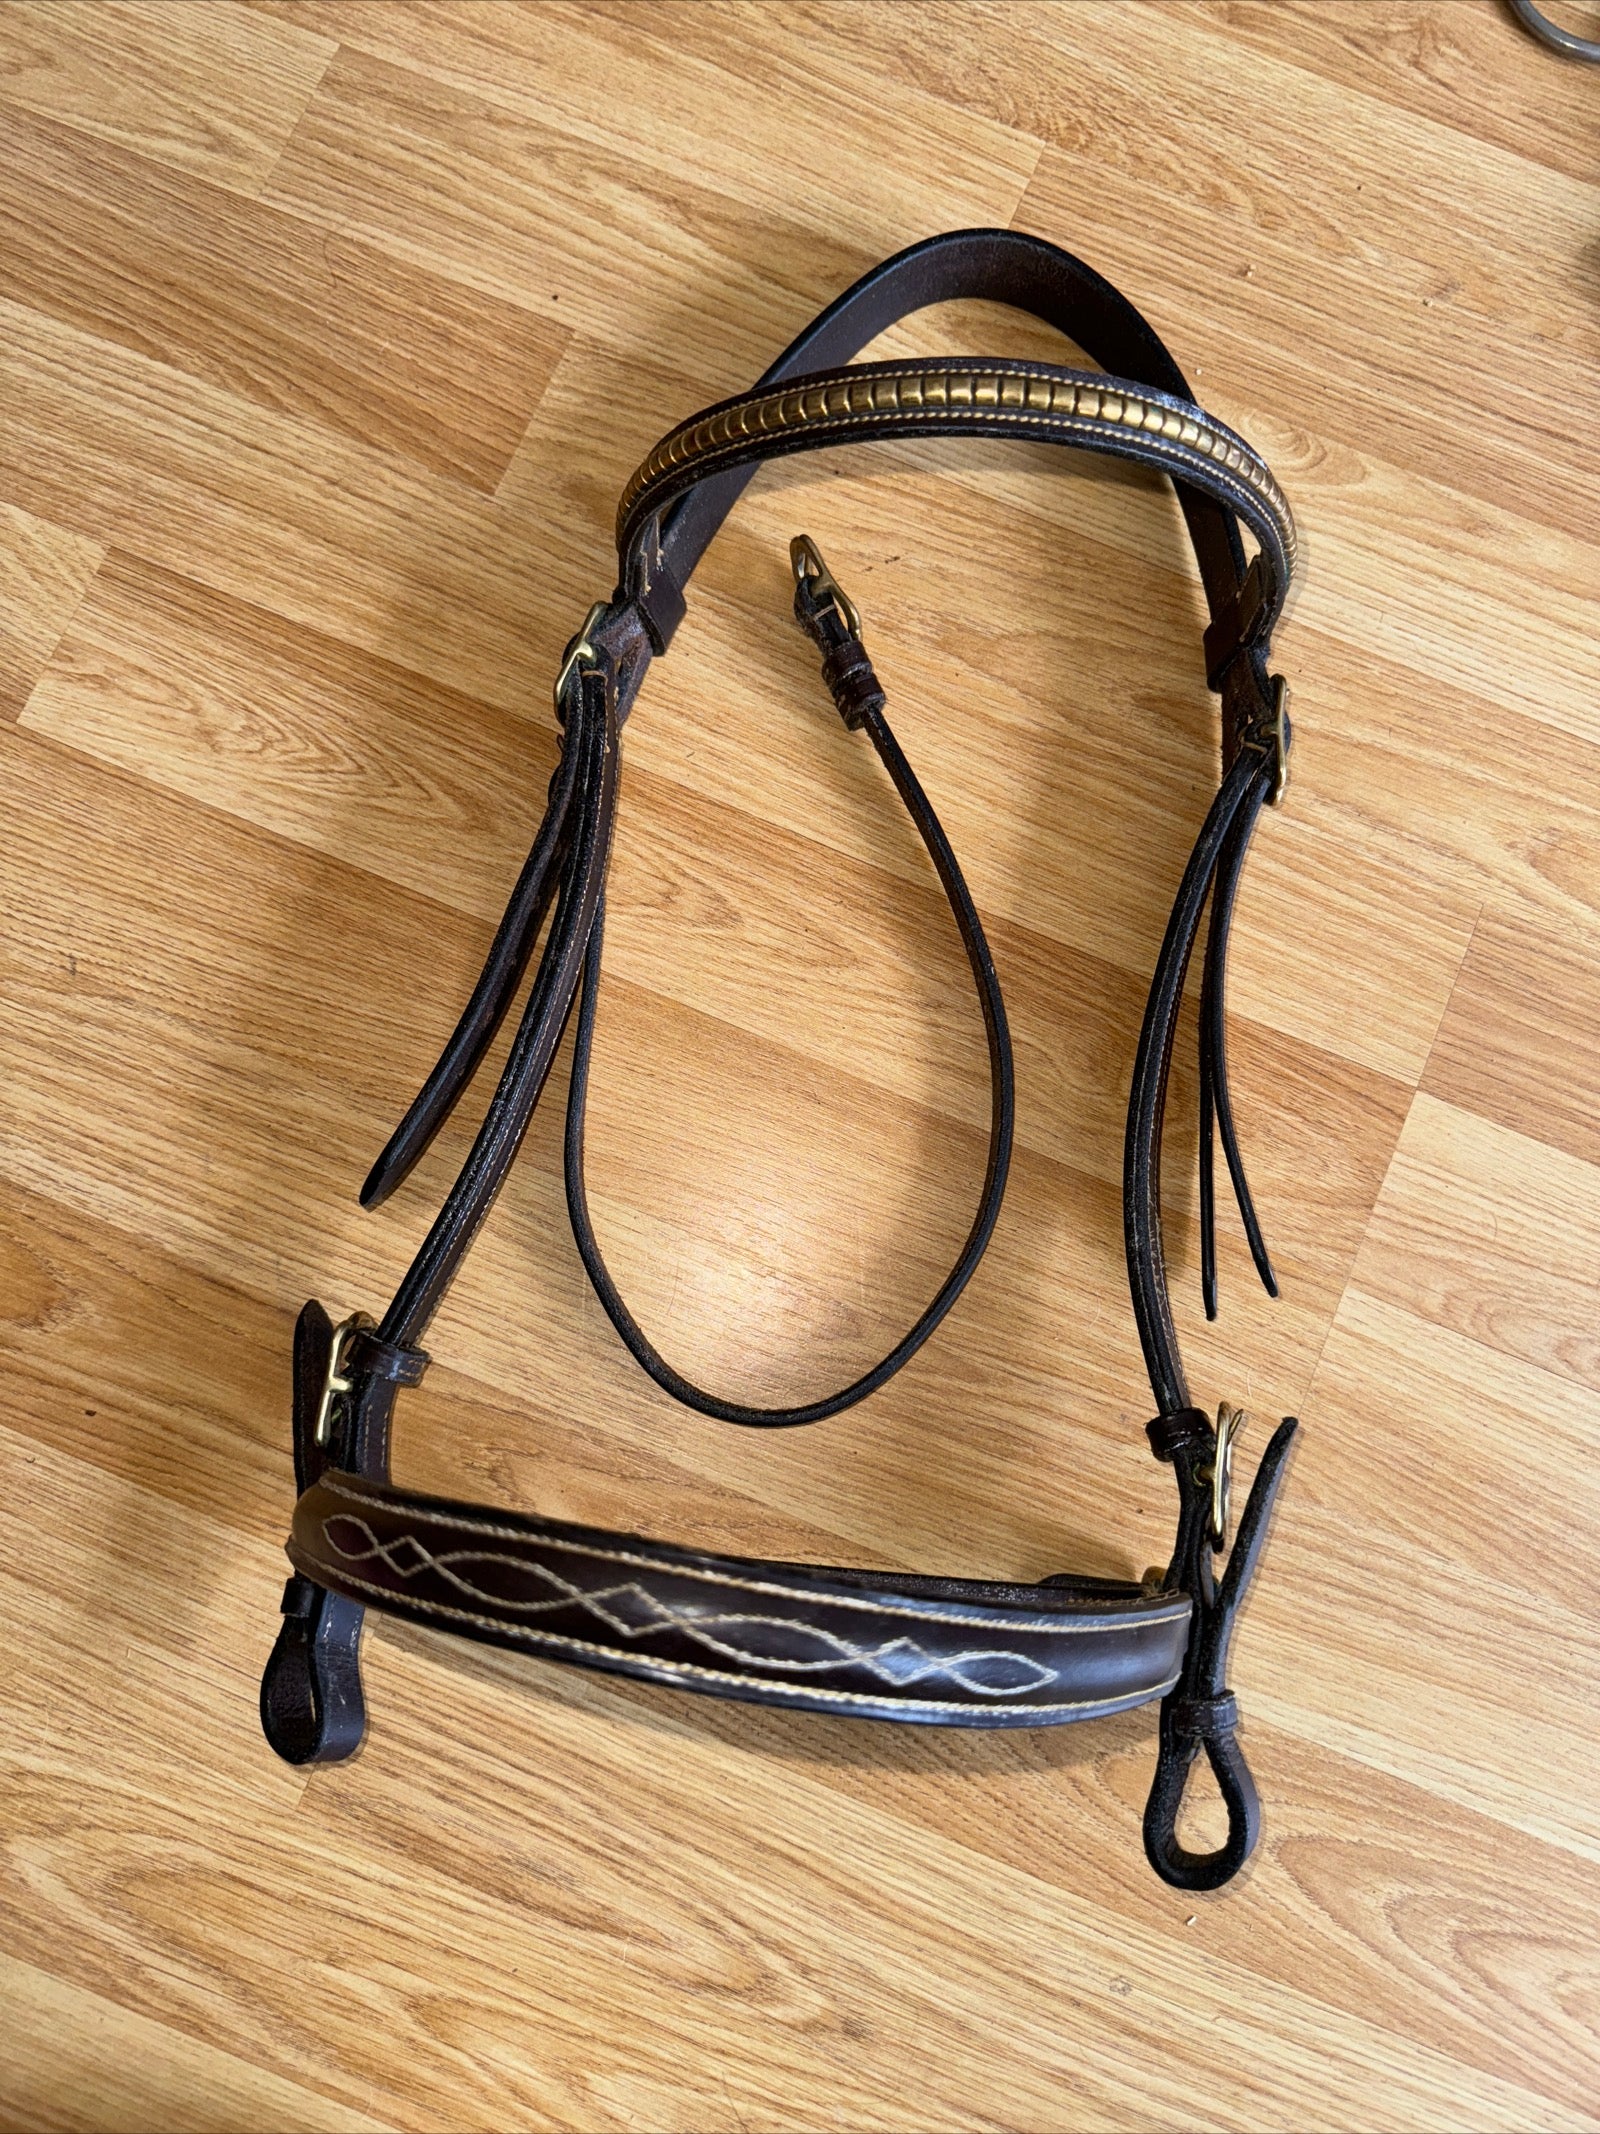 Inhand Full Size Brass Inlay Bridle - Free Post #300